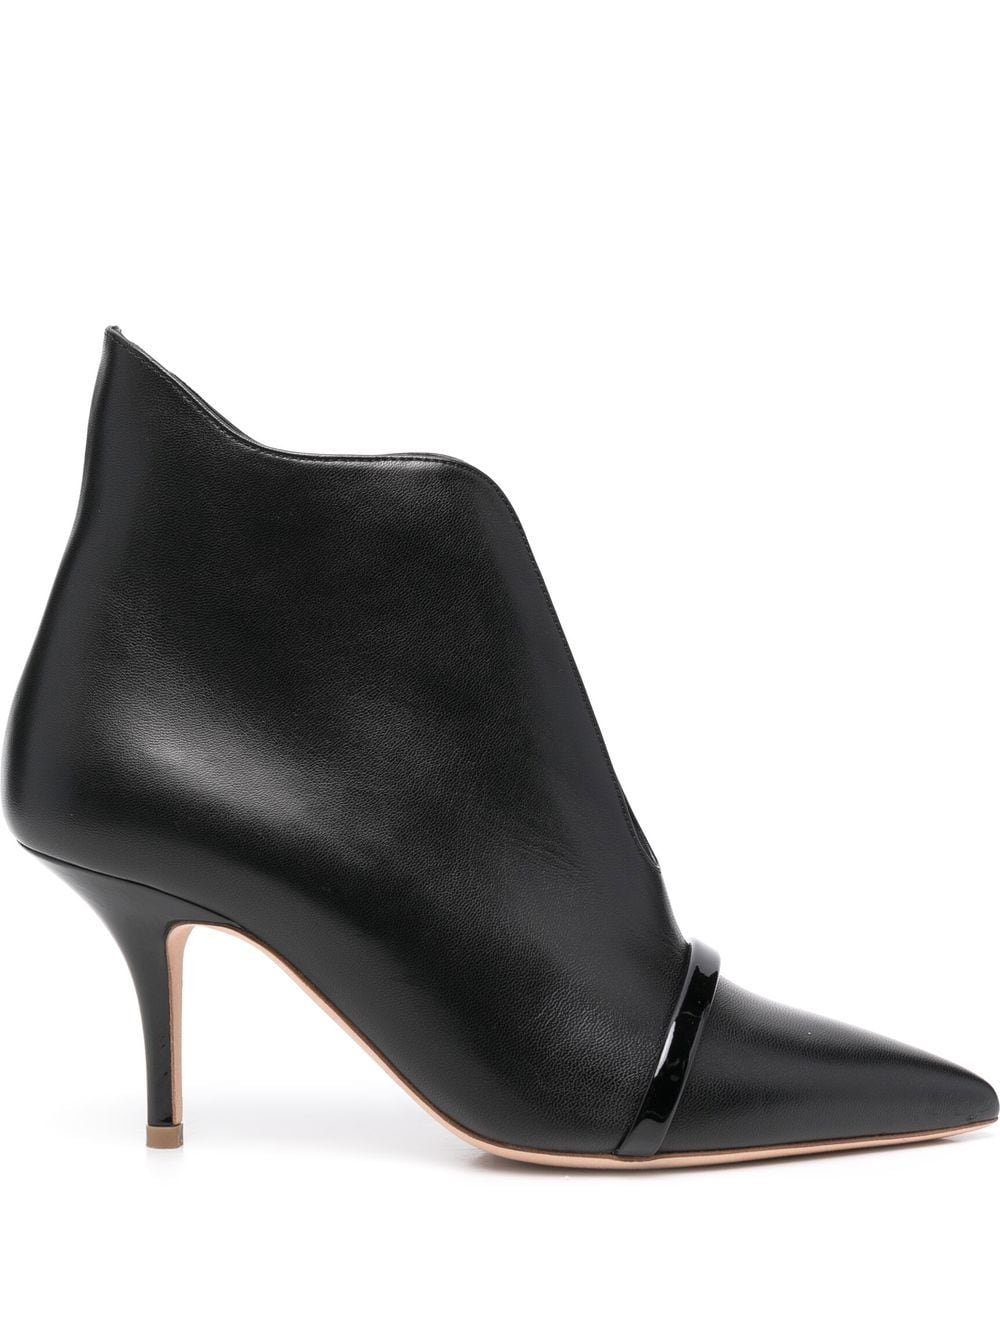 Malone Souliers Cora Leather Ankle Boots In Black